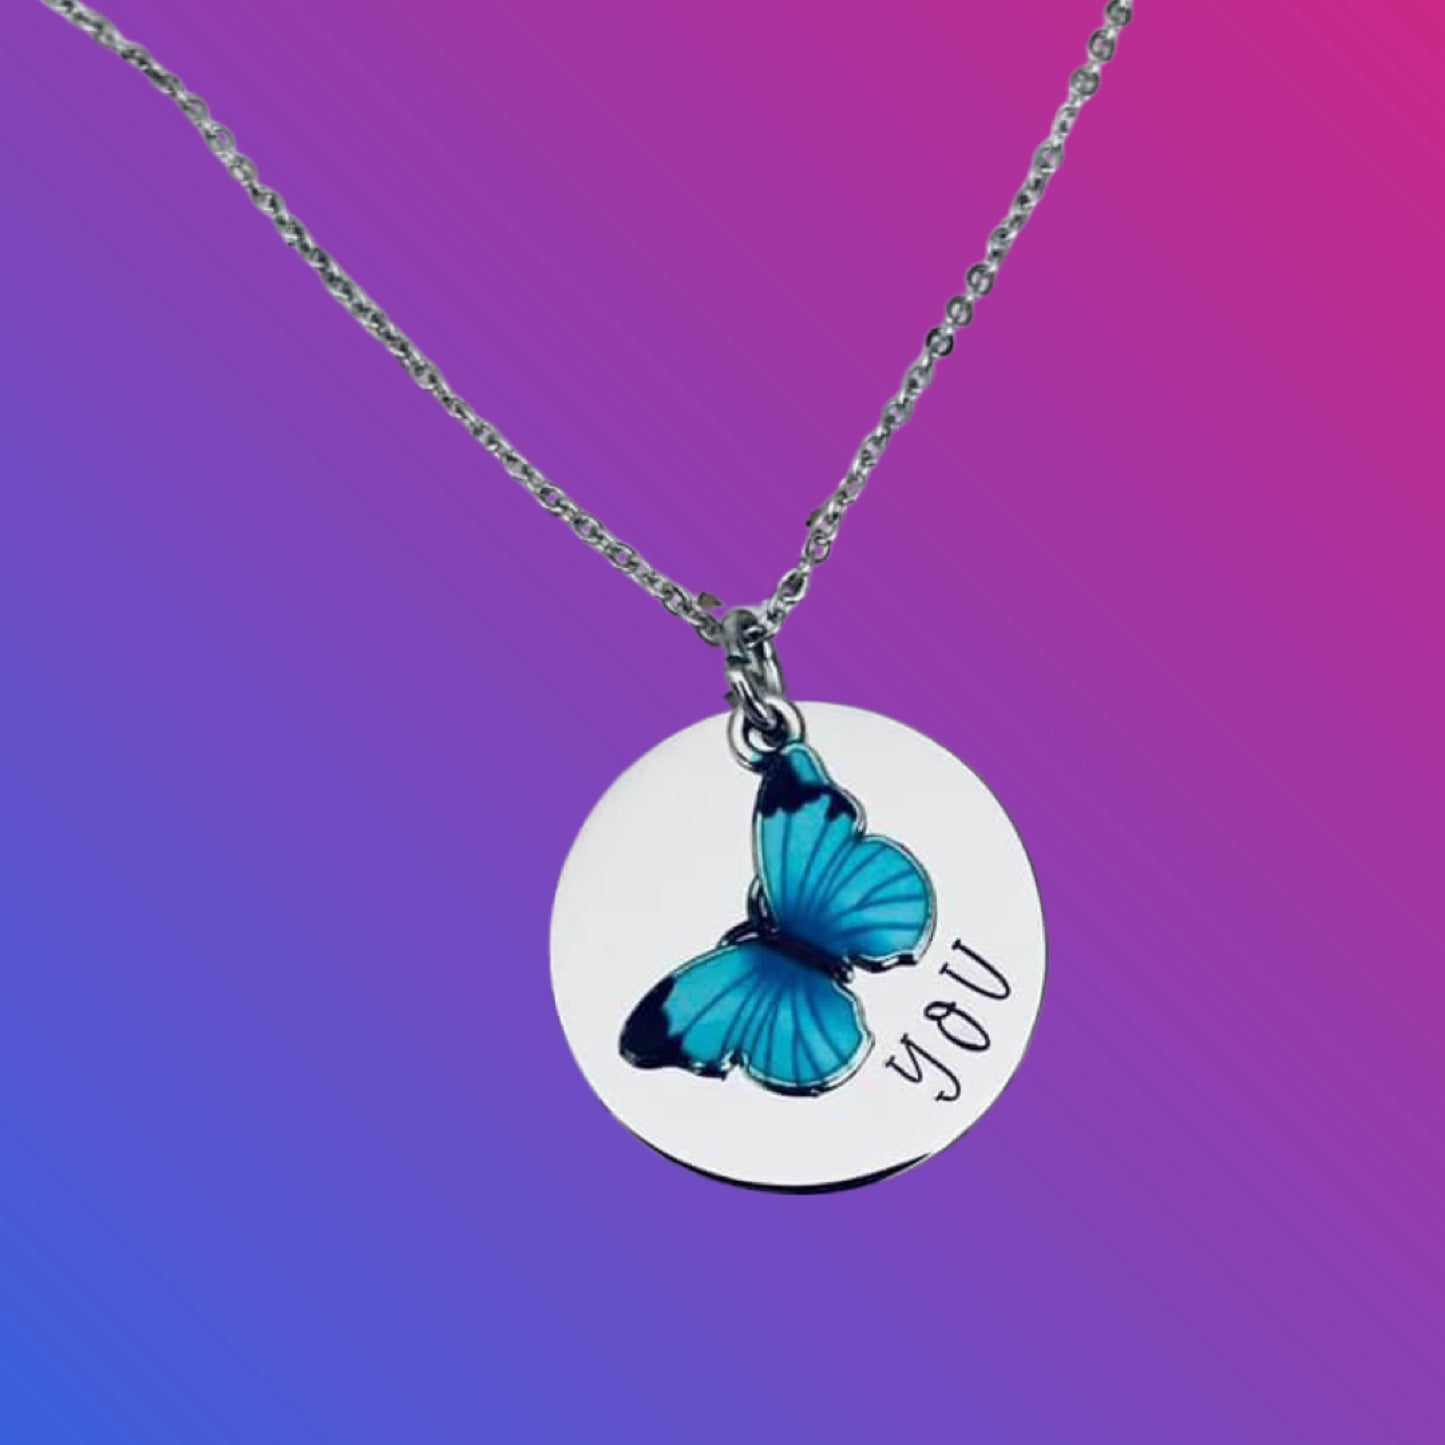 Butterfly You necklace